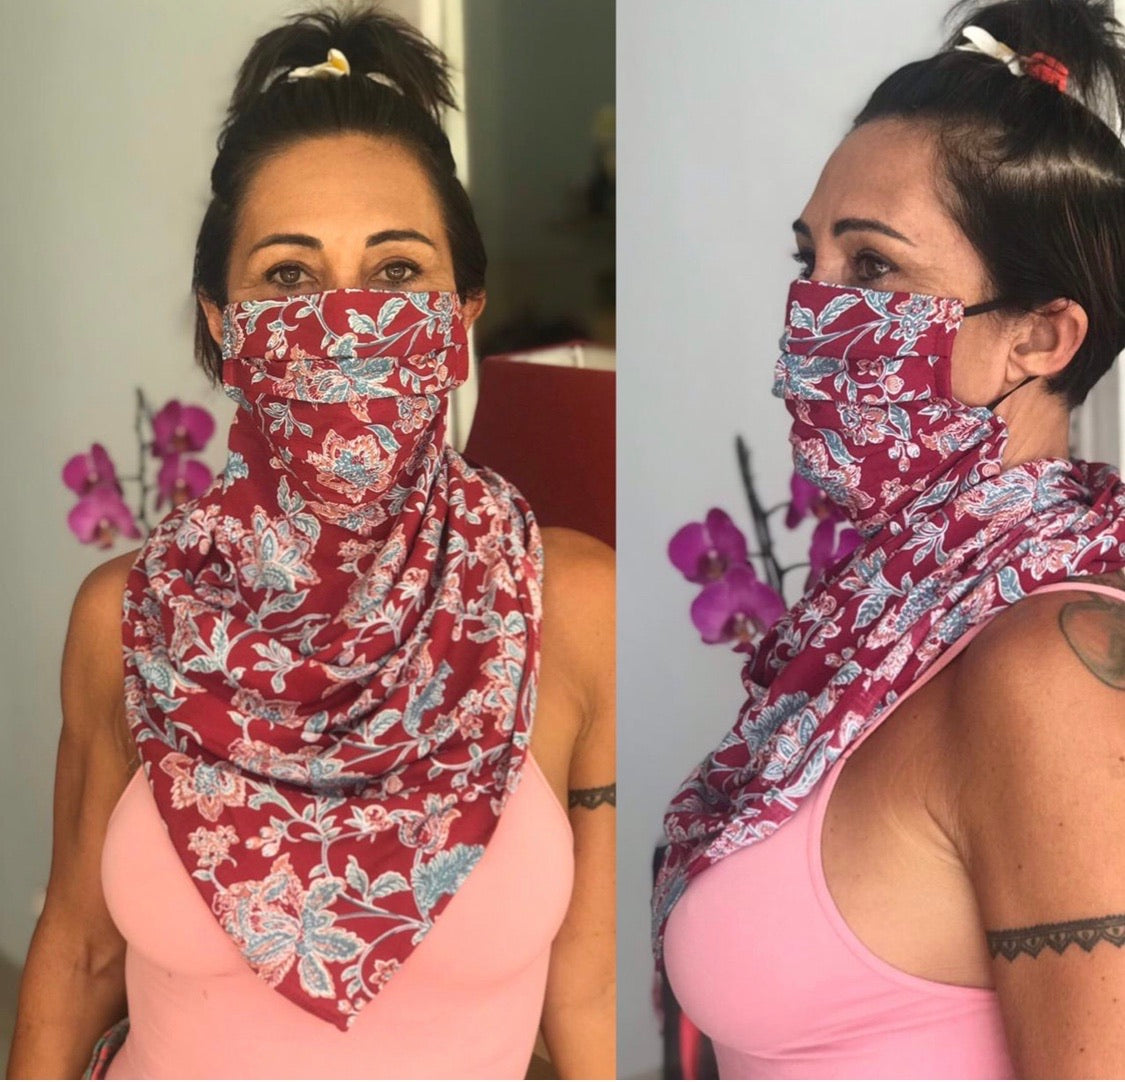 THE MASKERCHIEF  (3 in One: Face Mask/Scarf/Tie Top)